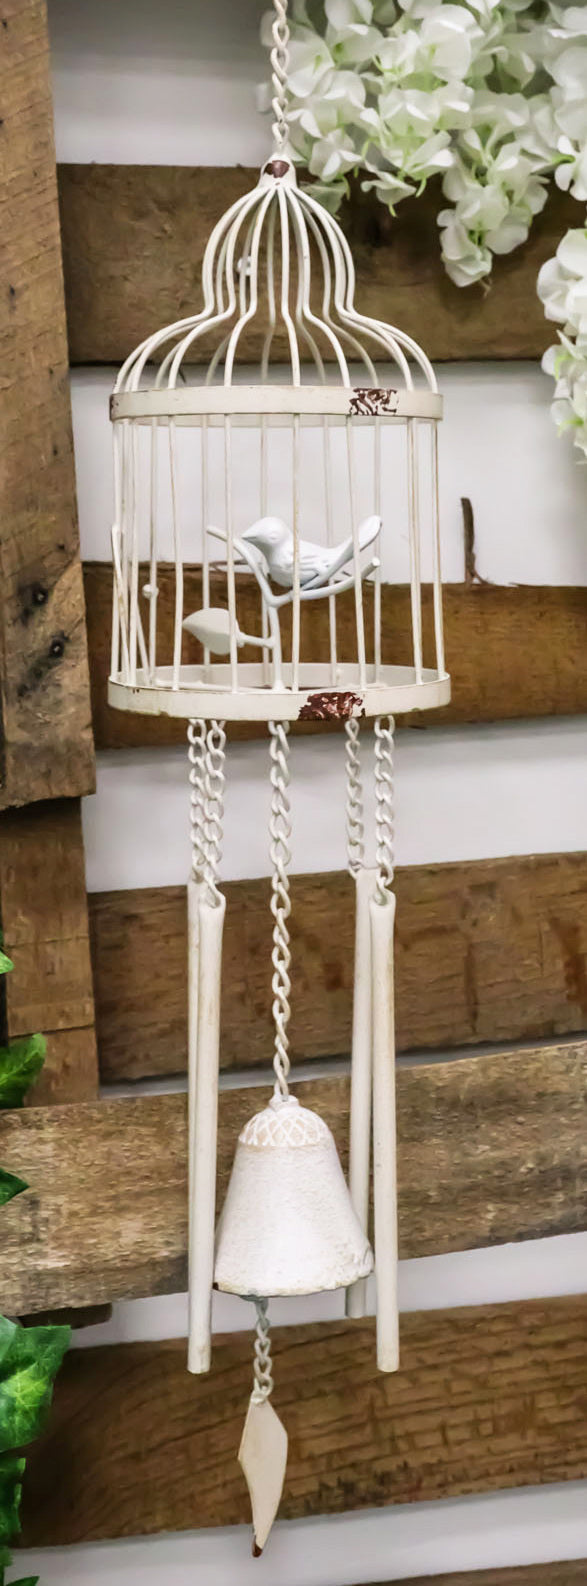 Whimsical Rustic White Bird Perching On Twig In Cage Aluminum Metal Wind Chime